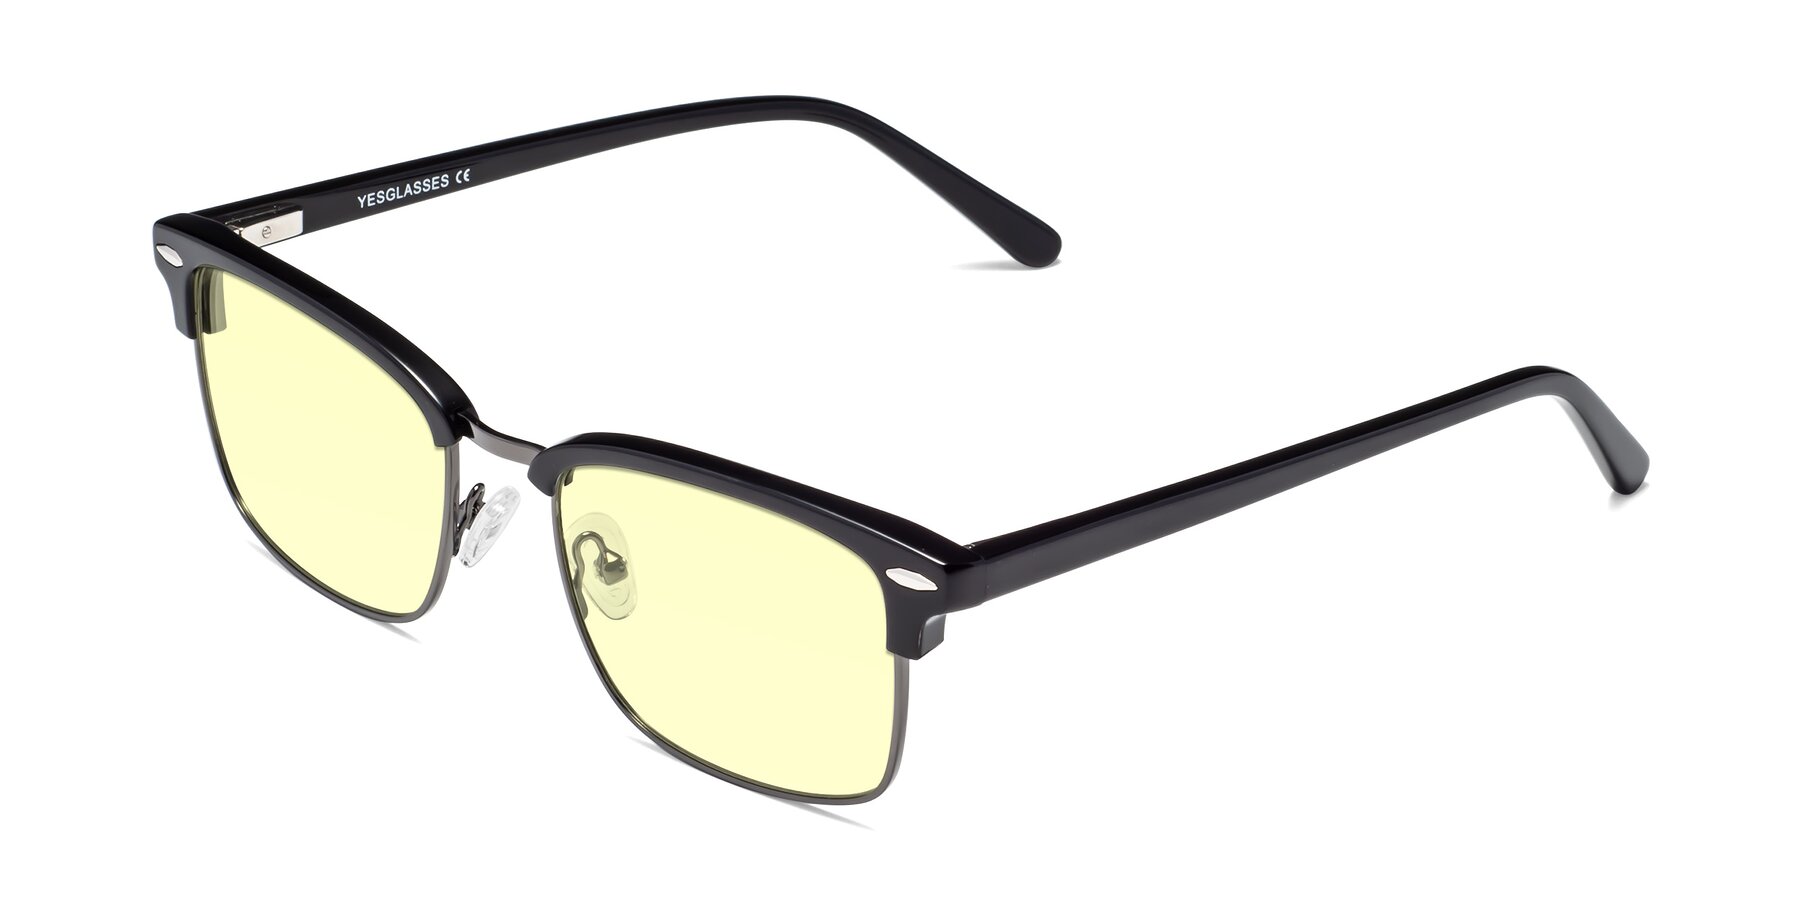 Angle of 17464 in Black-Gunmetal with Light Yellow Tinted Lenses